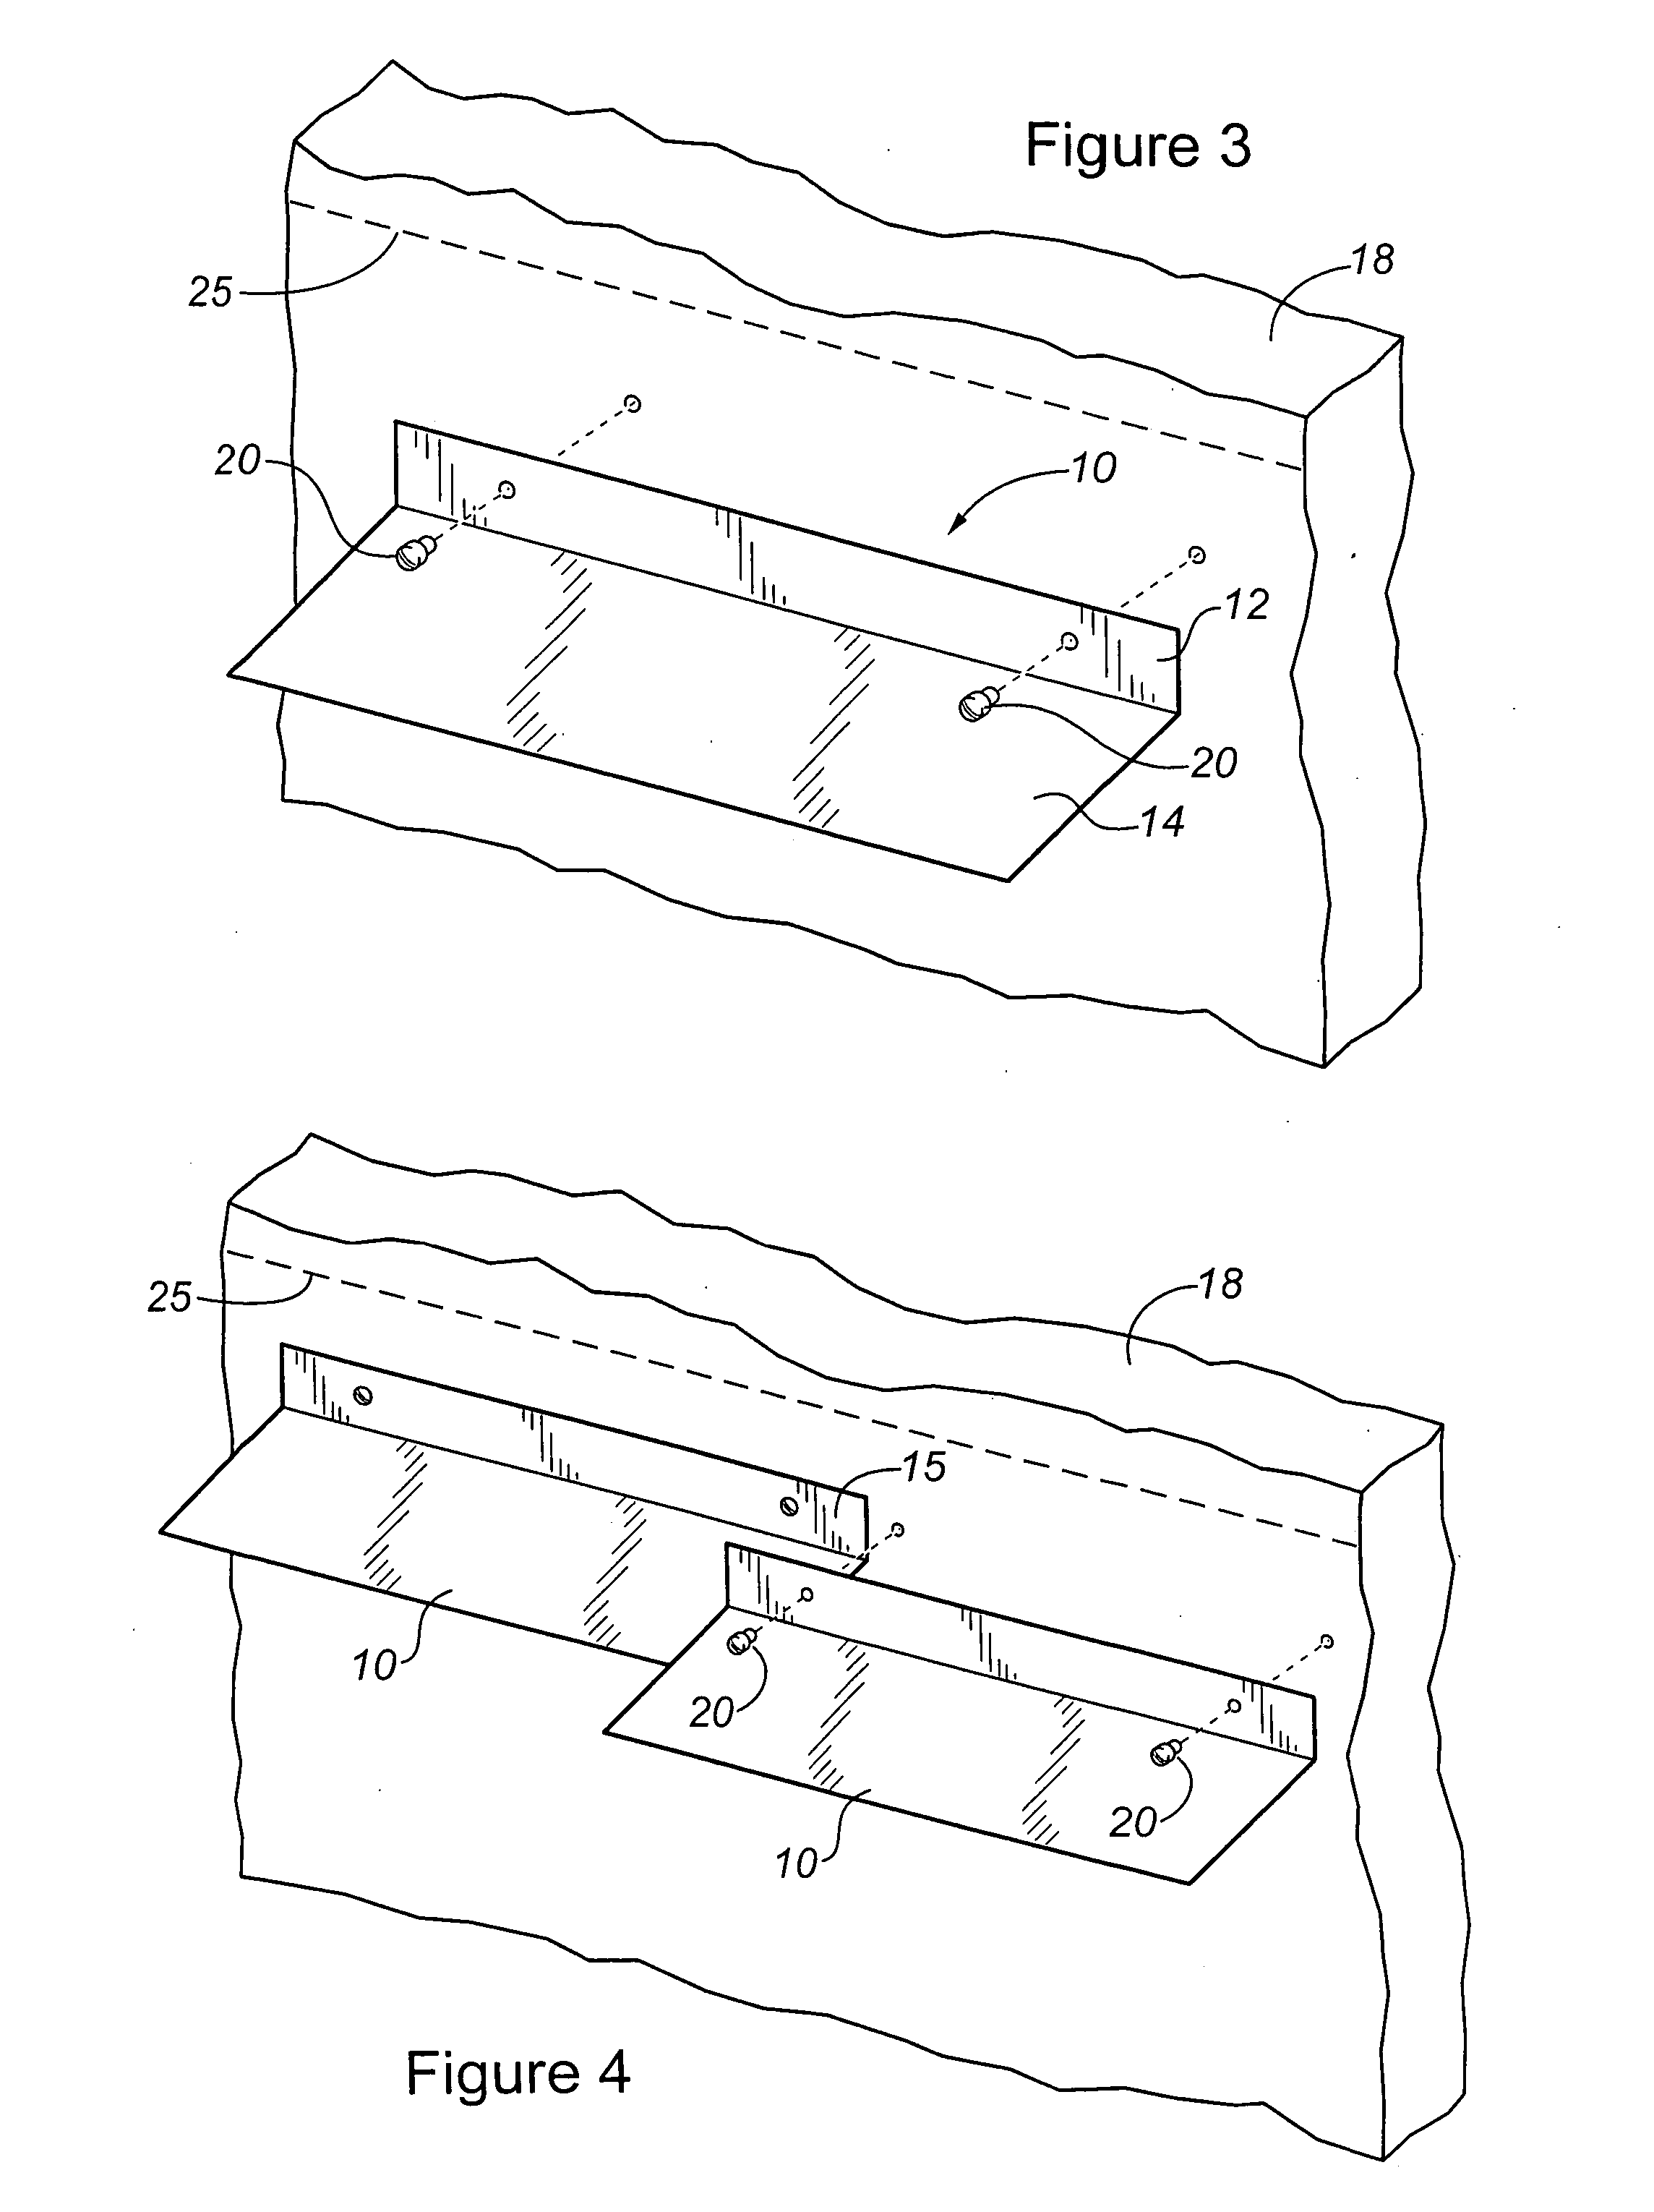 Method and apparatus for deflecting liquid from a foundation wall